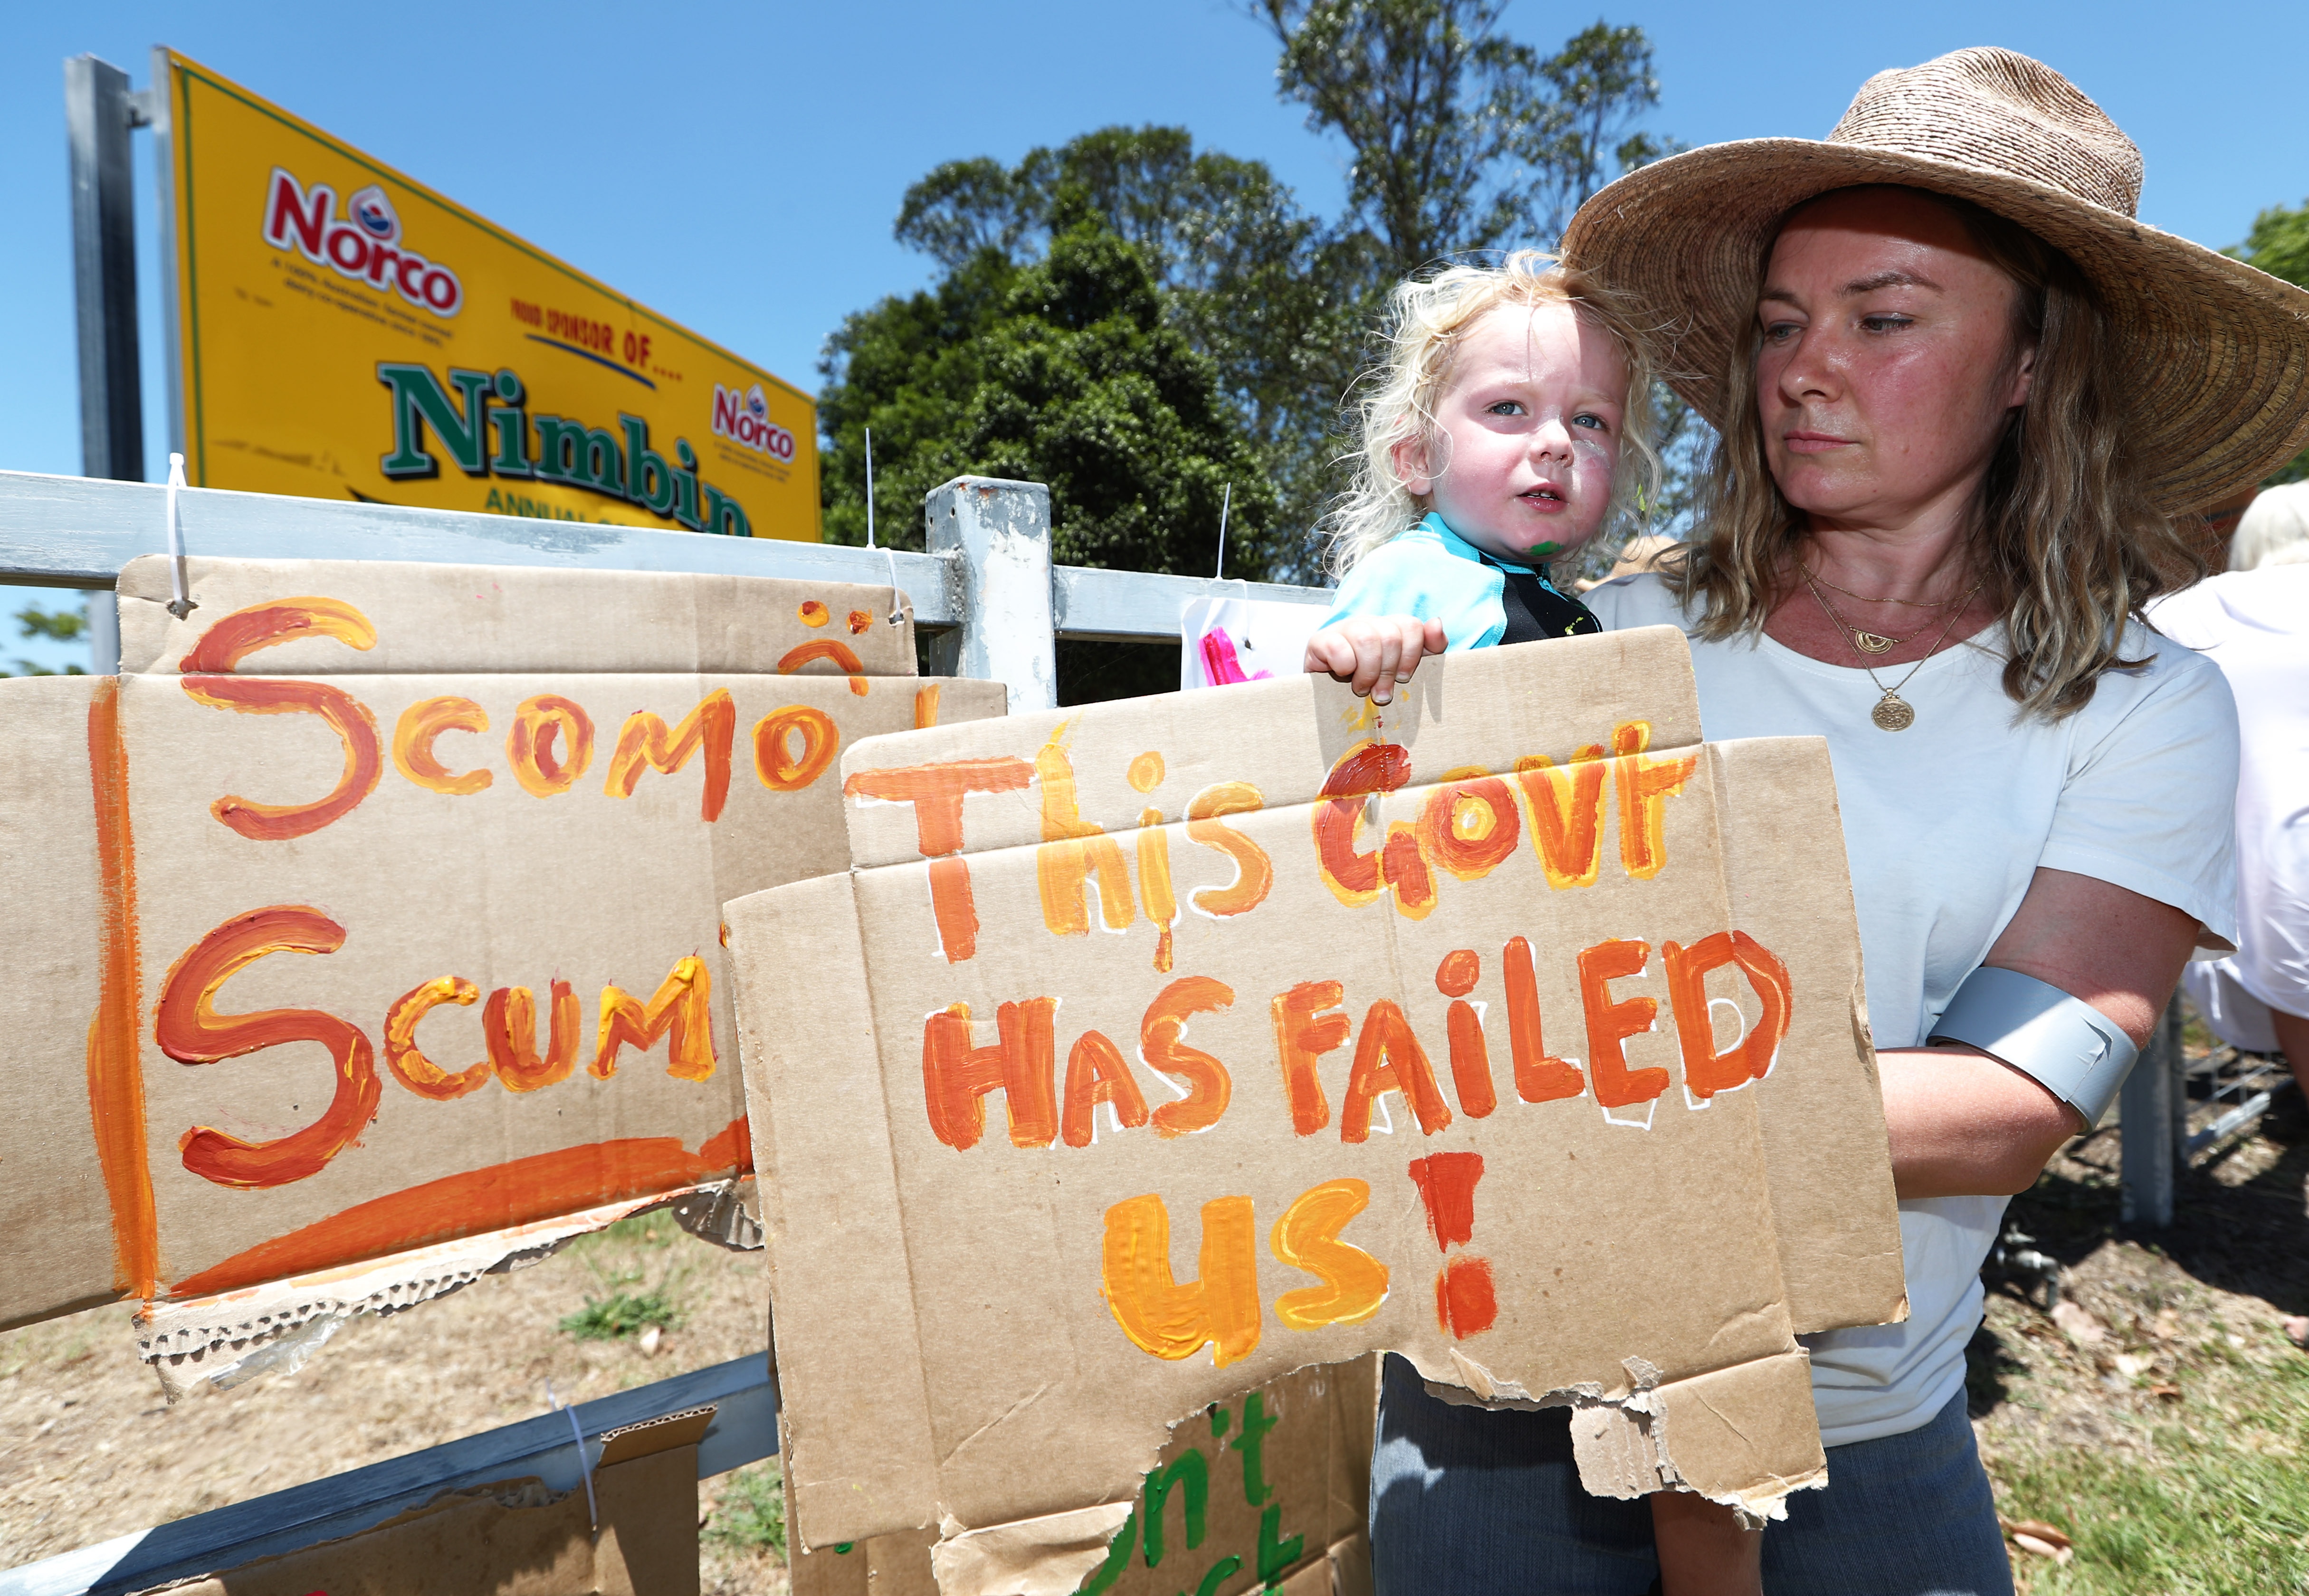 Tuntable Falls resident Amanda Collien and two-year-old daughter Etienne make their position known on the government's climate policies.